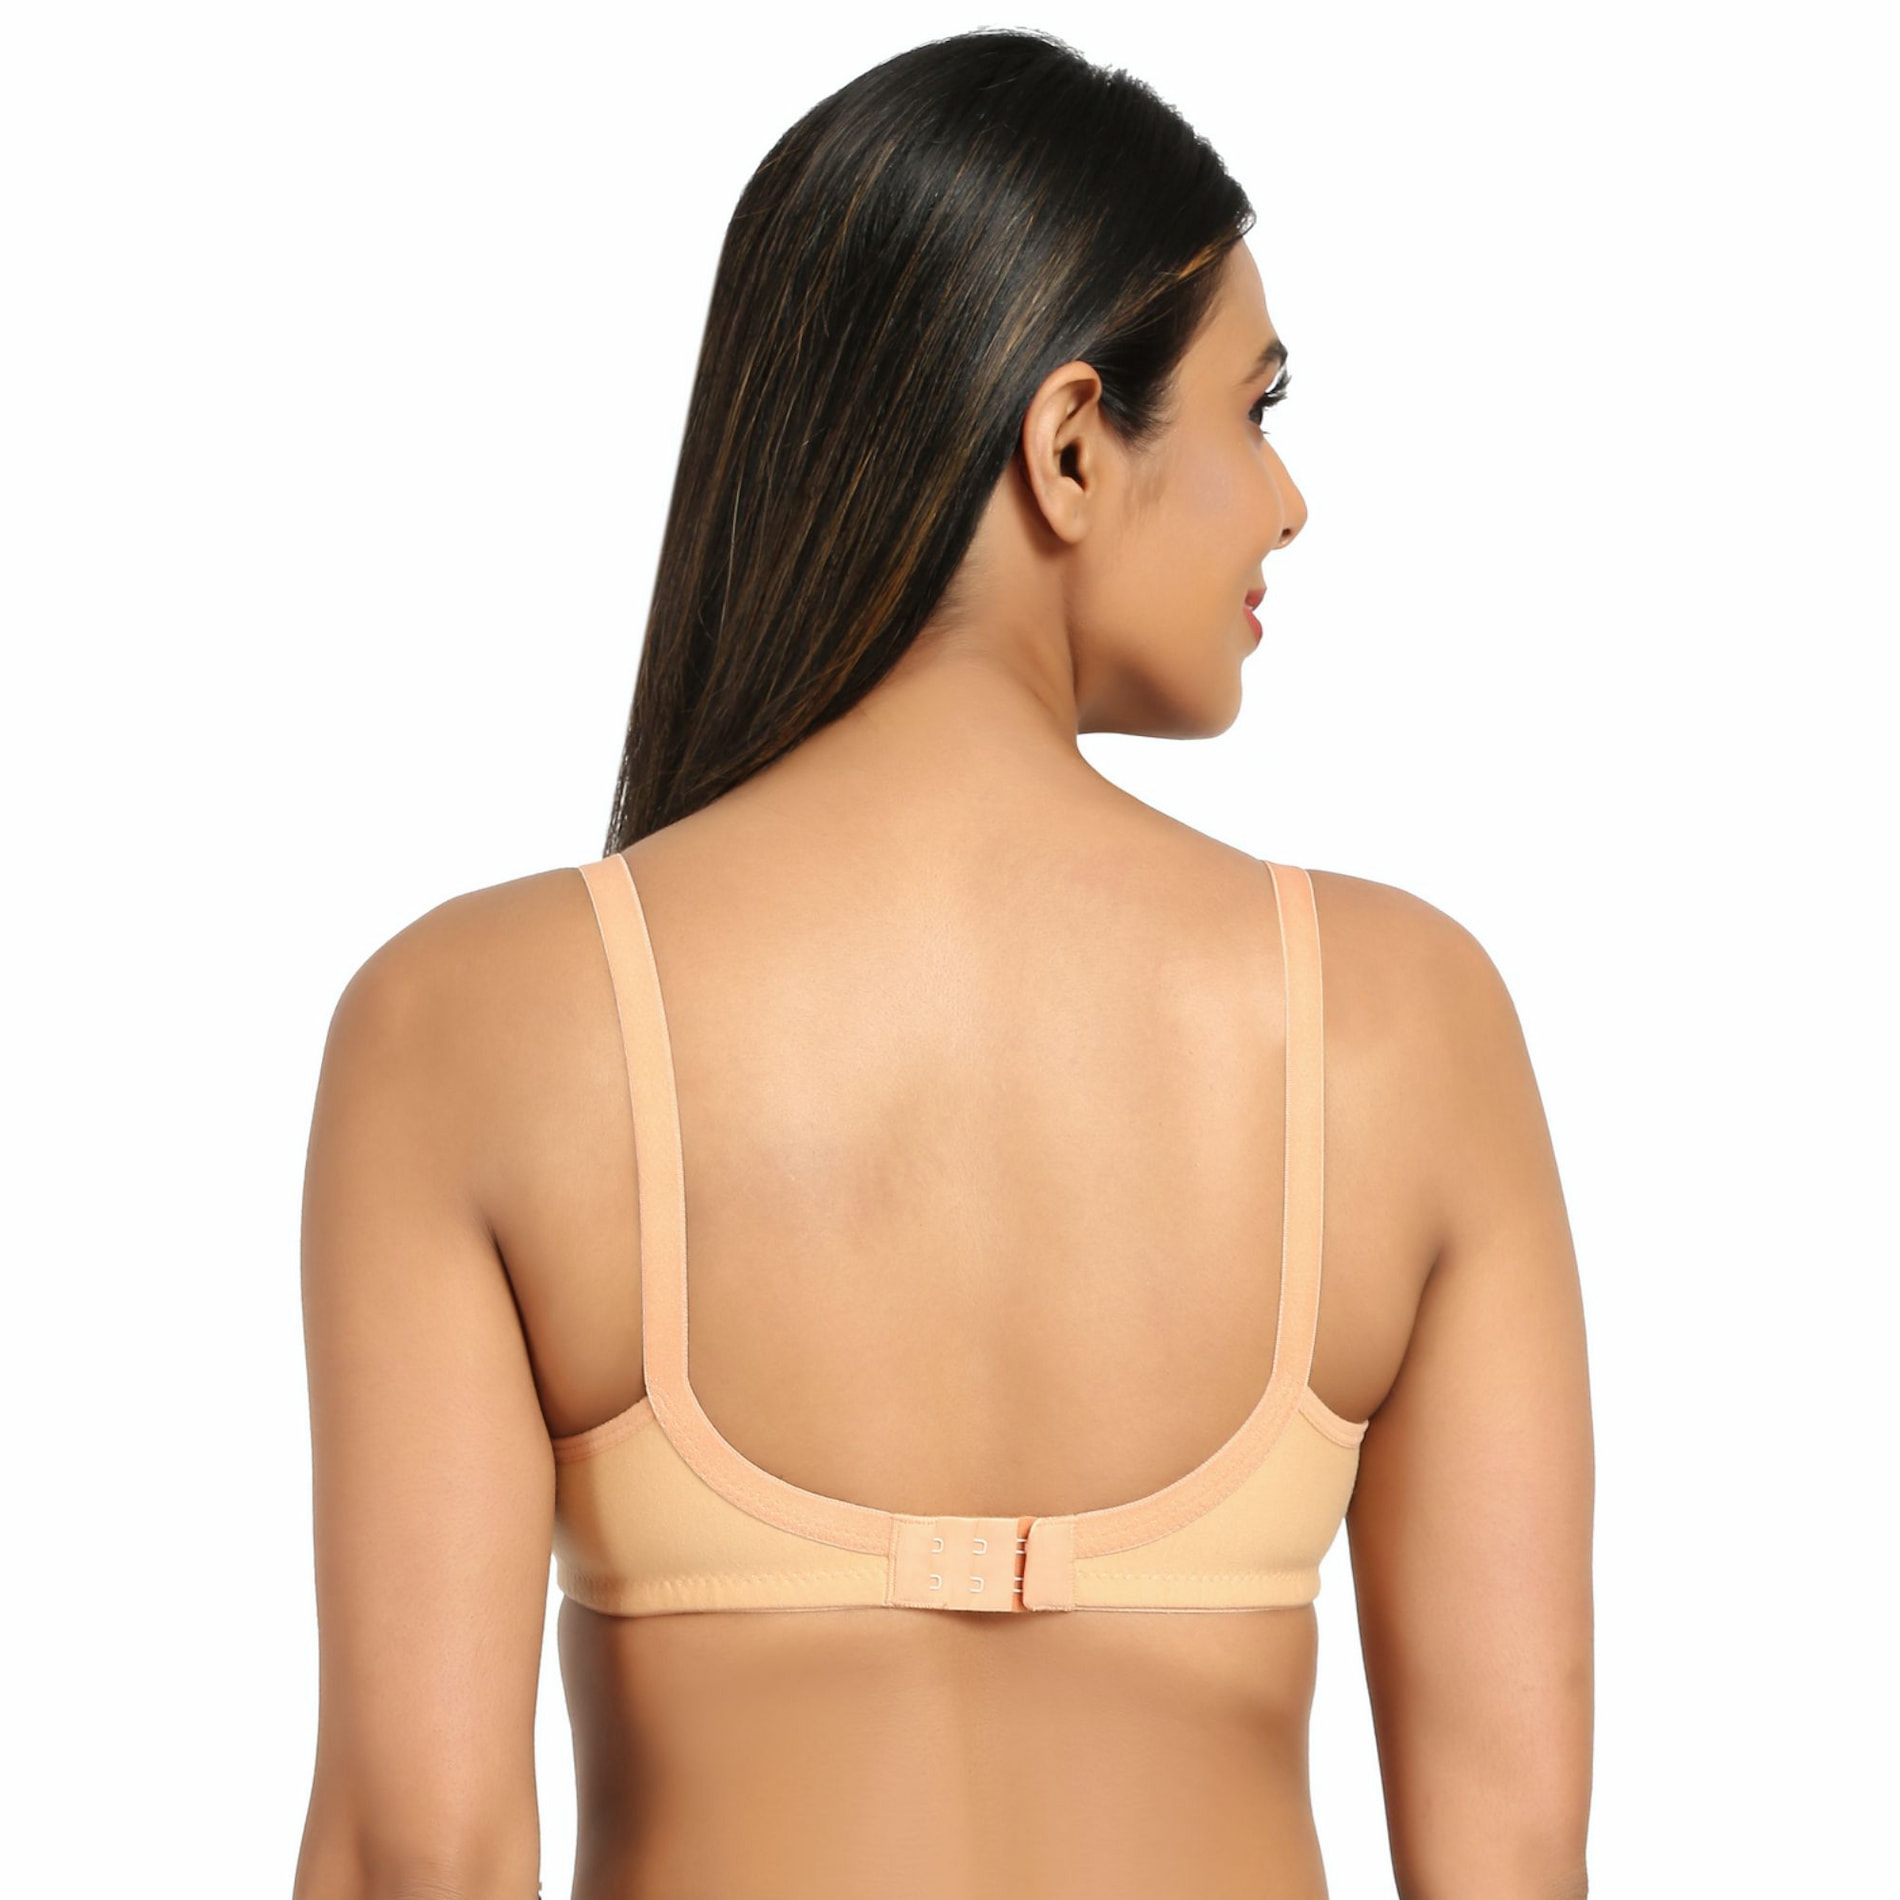 Mylo Maternity/Nursing Bras Non-Wired, Non-Padded - Pack of 3 with free Bra Extender (Sandalwood, Persian Blue & Dark pink) 38 B